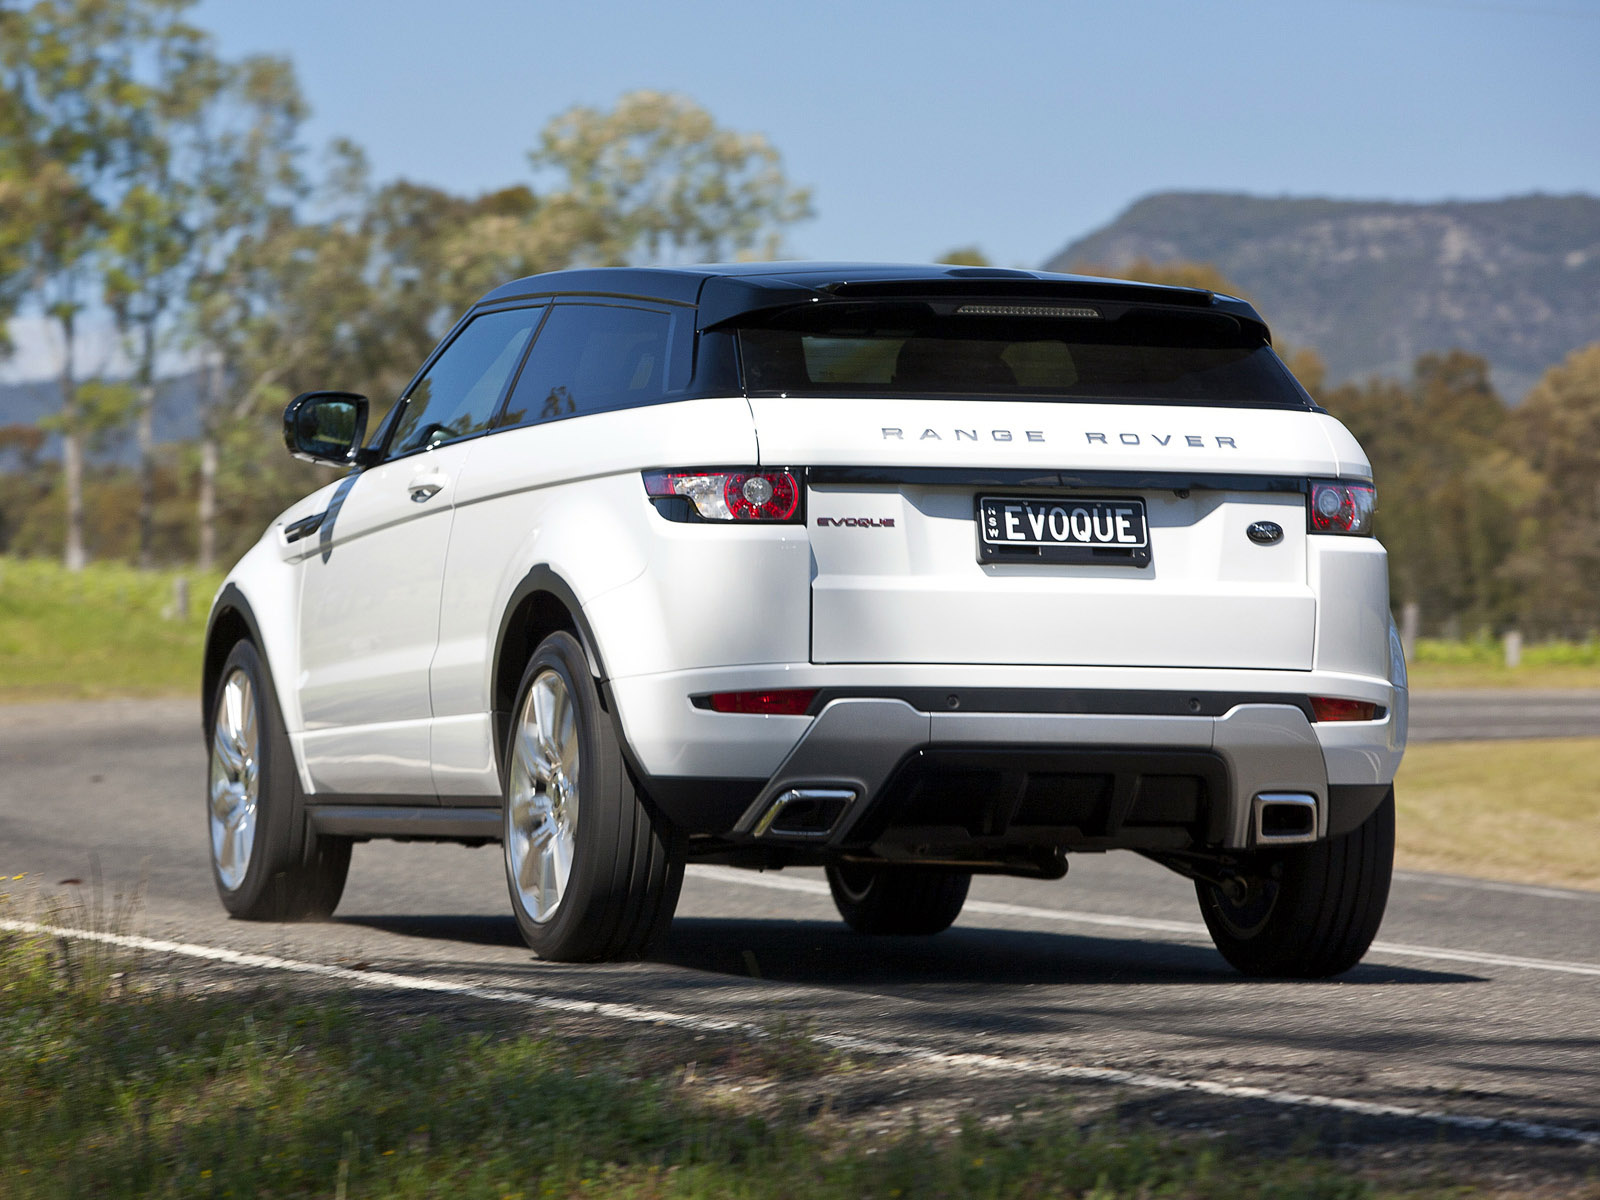 Car in pictures car photo gallery » Land Rover Range